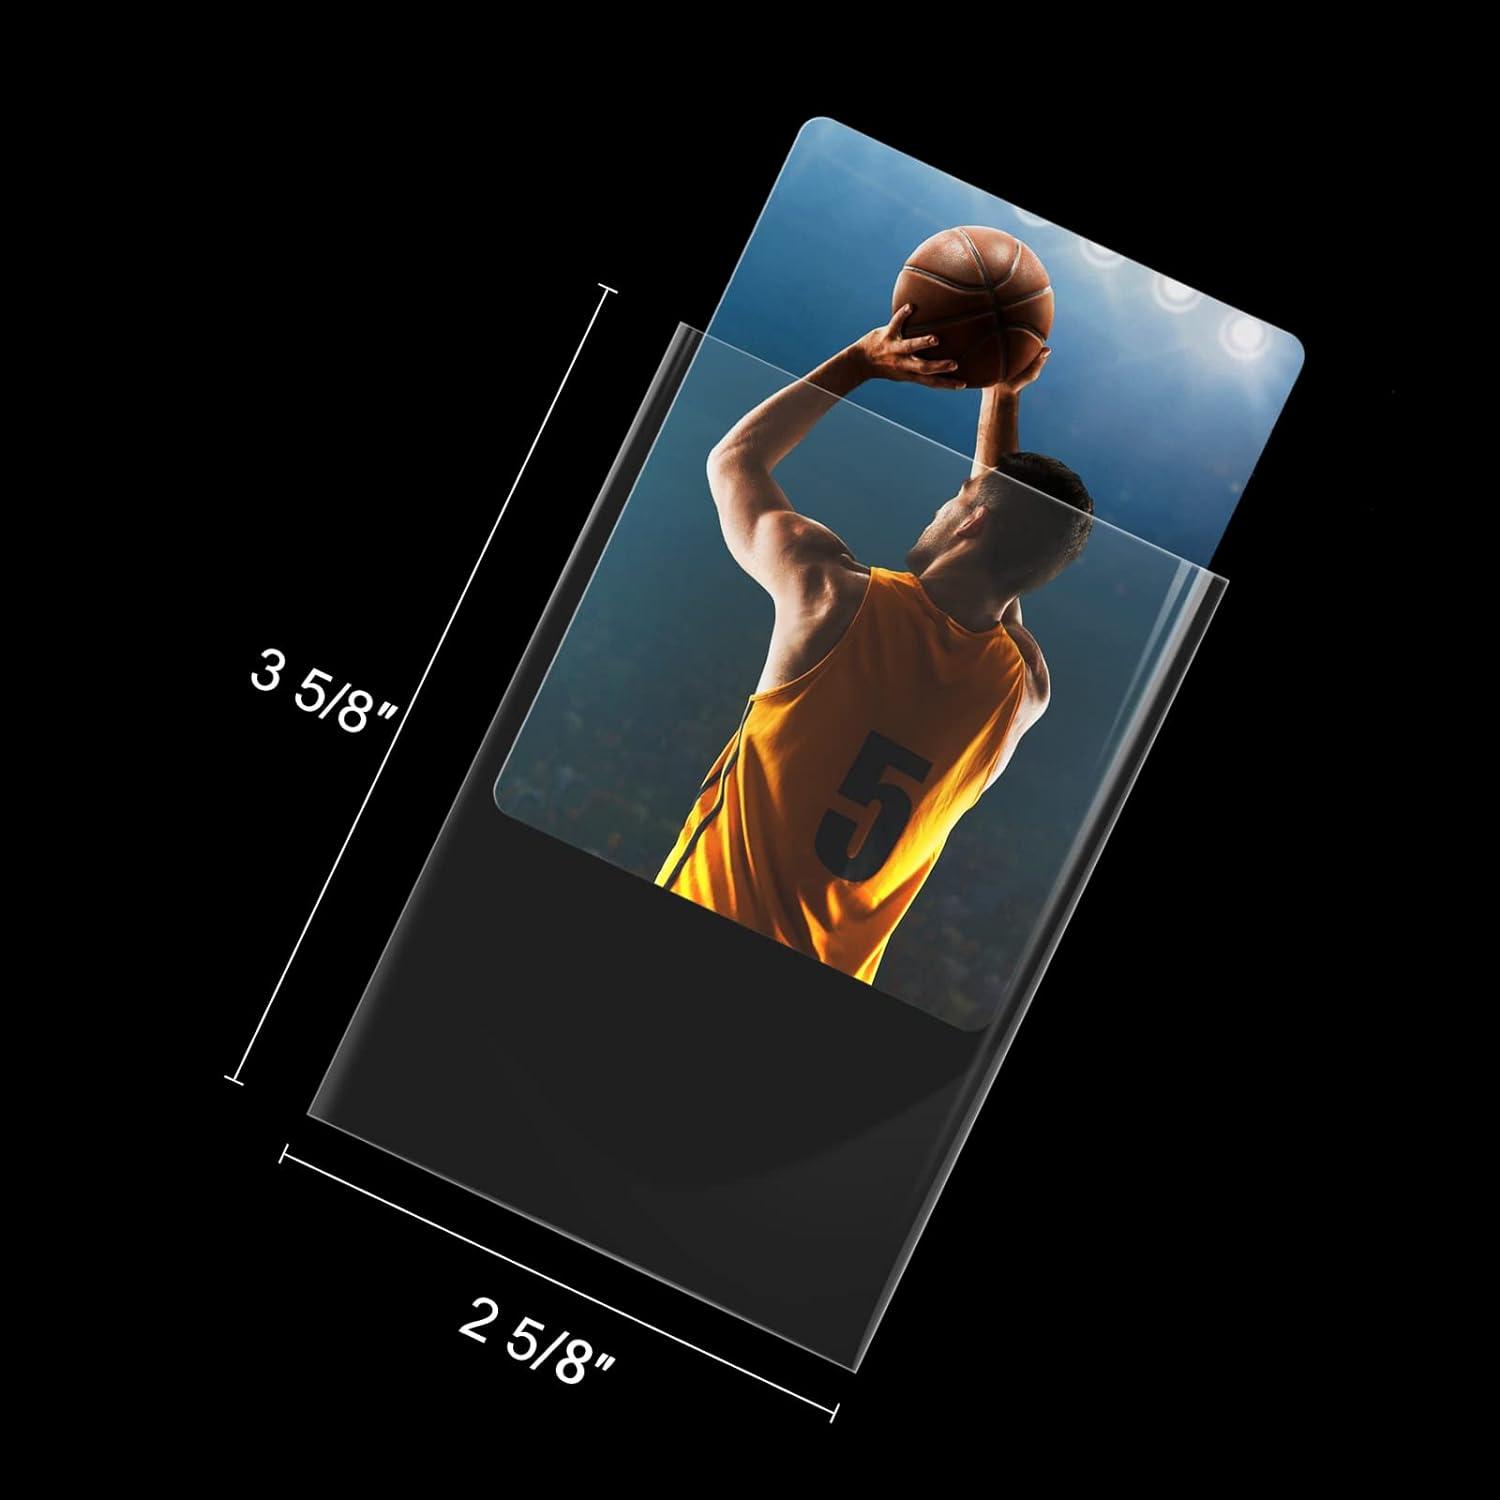 Hard Trading Cards Sleeves Plastic Card Hard Case Cover 3x4 Collector  Playing Card Sleeves Protector for Baseball Football Basketball Sport Cards  with